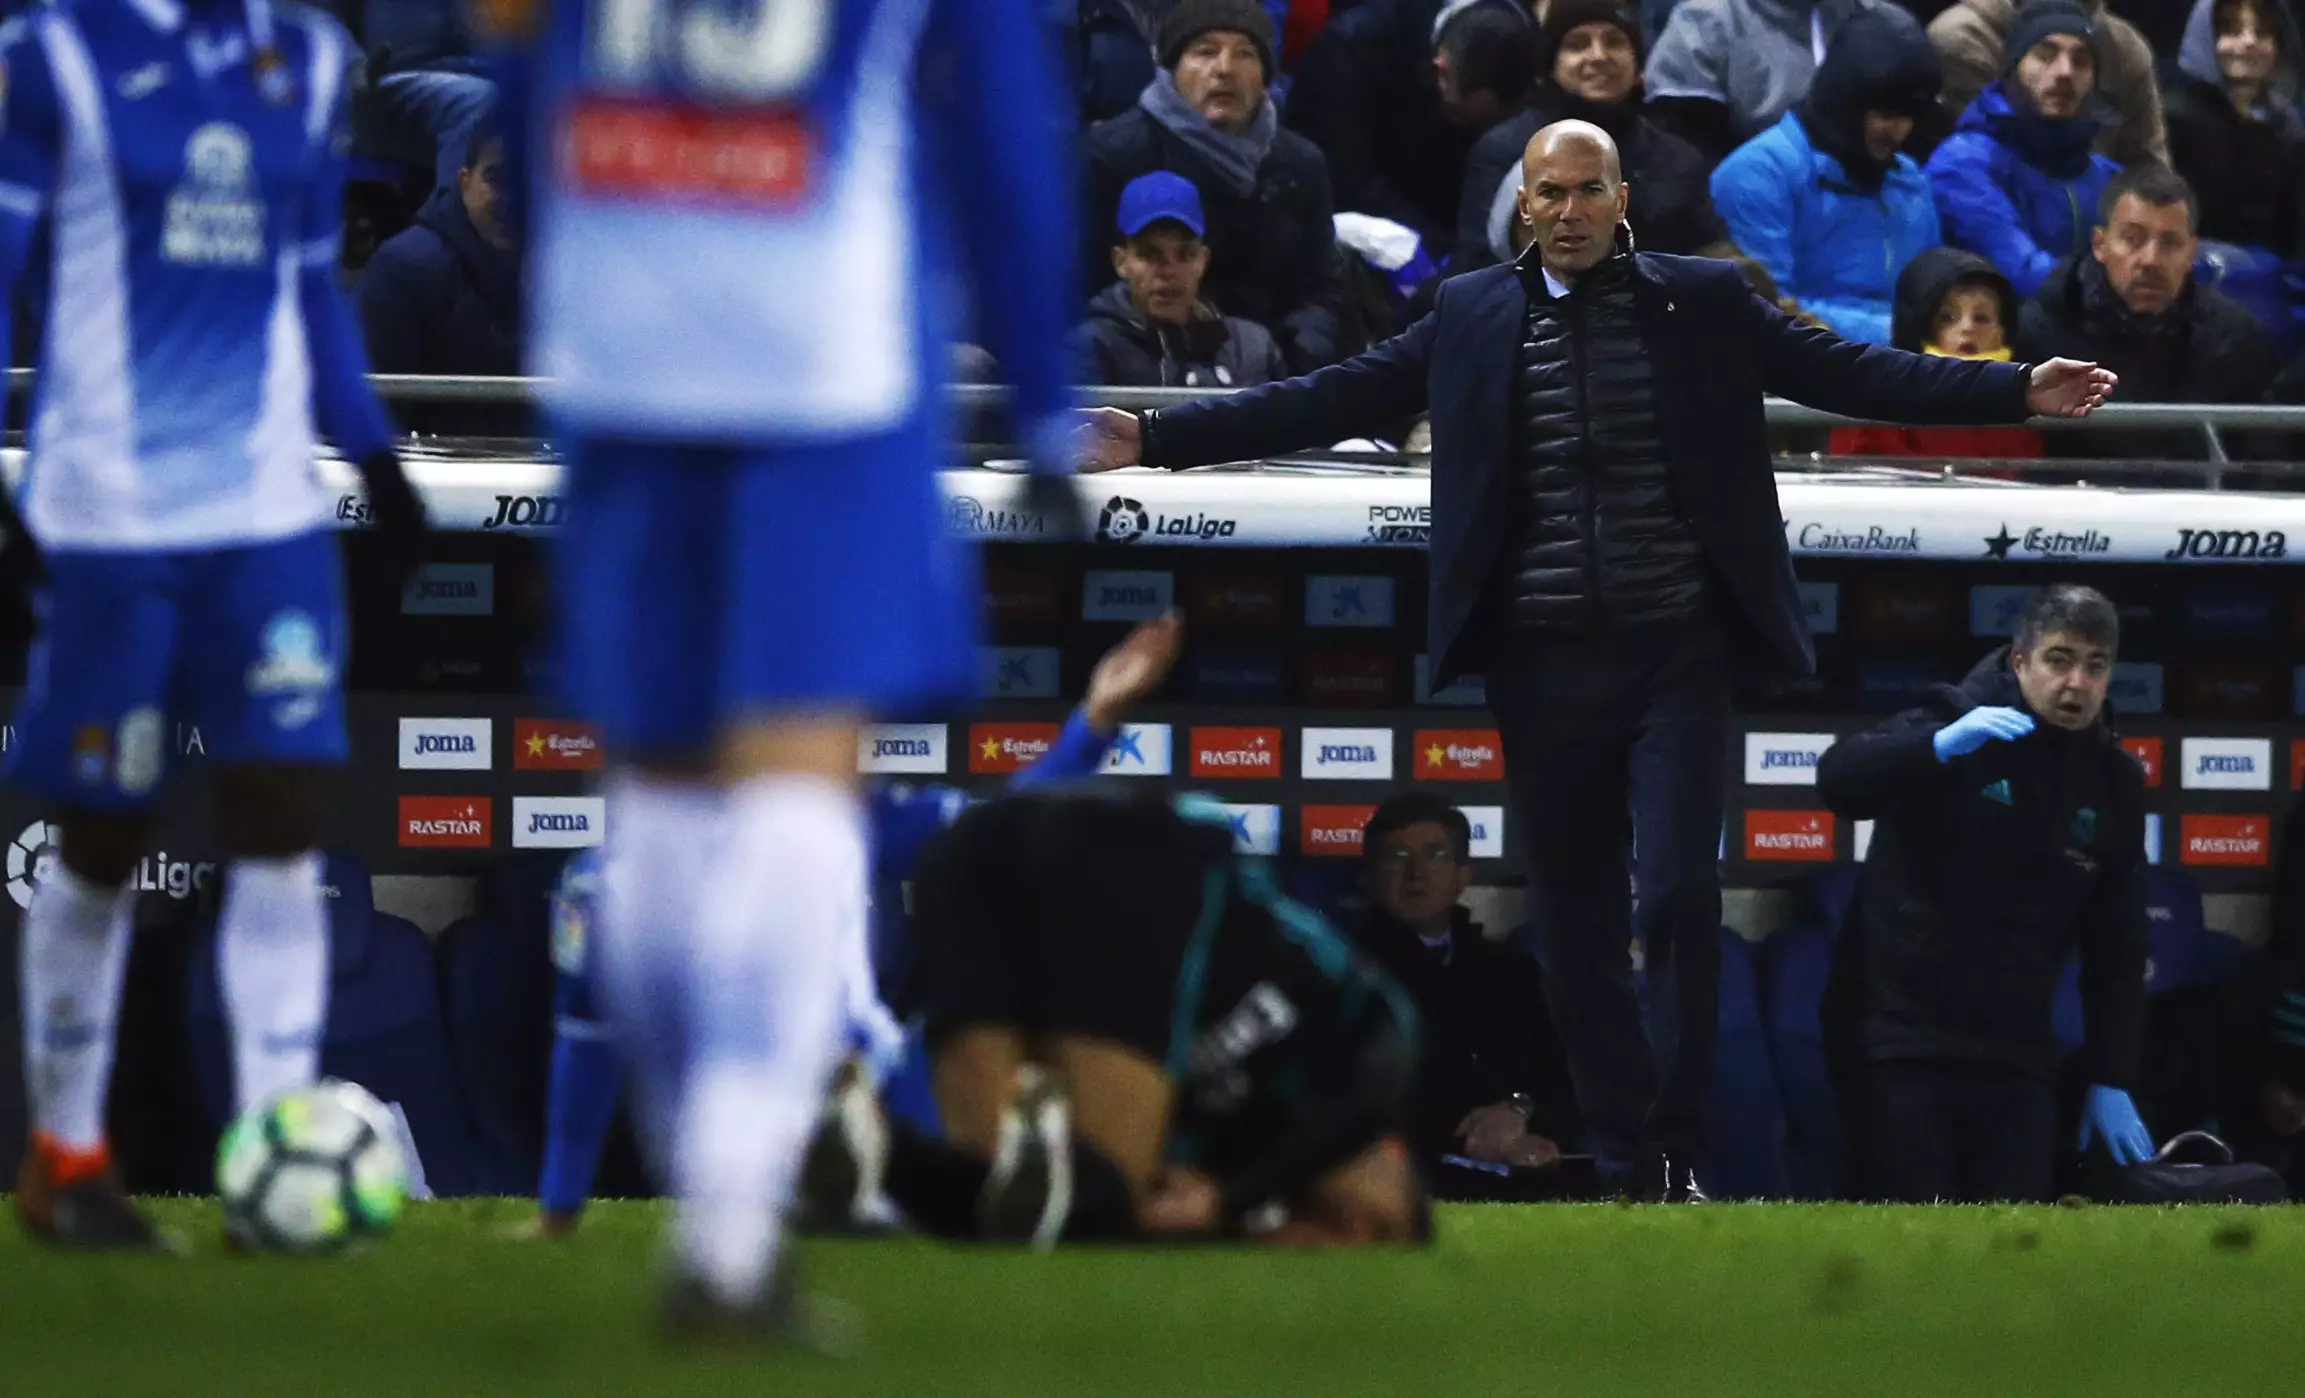 Zidane remonstrates on the touchline. Image: PA